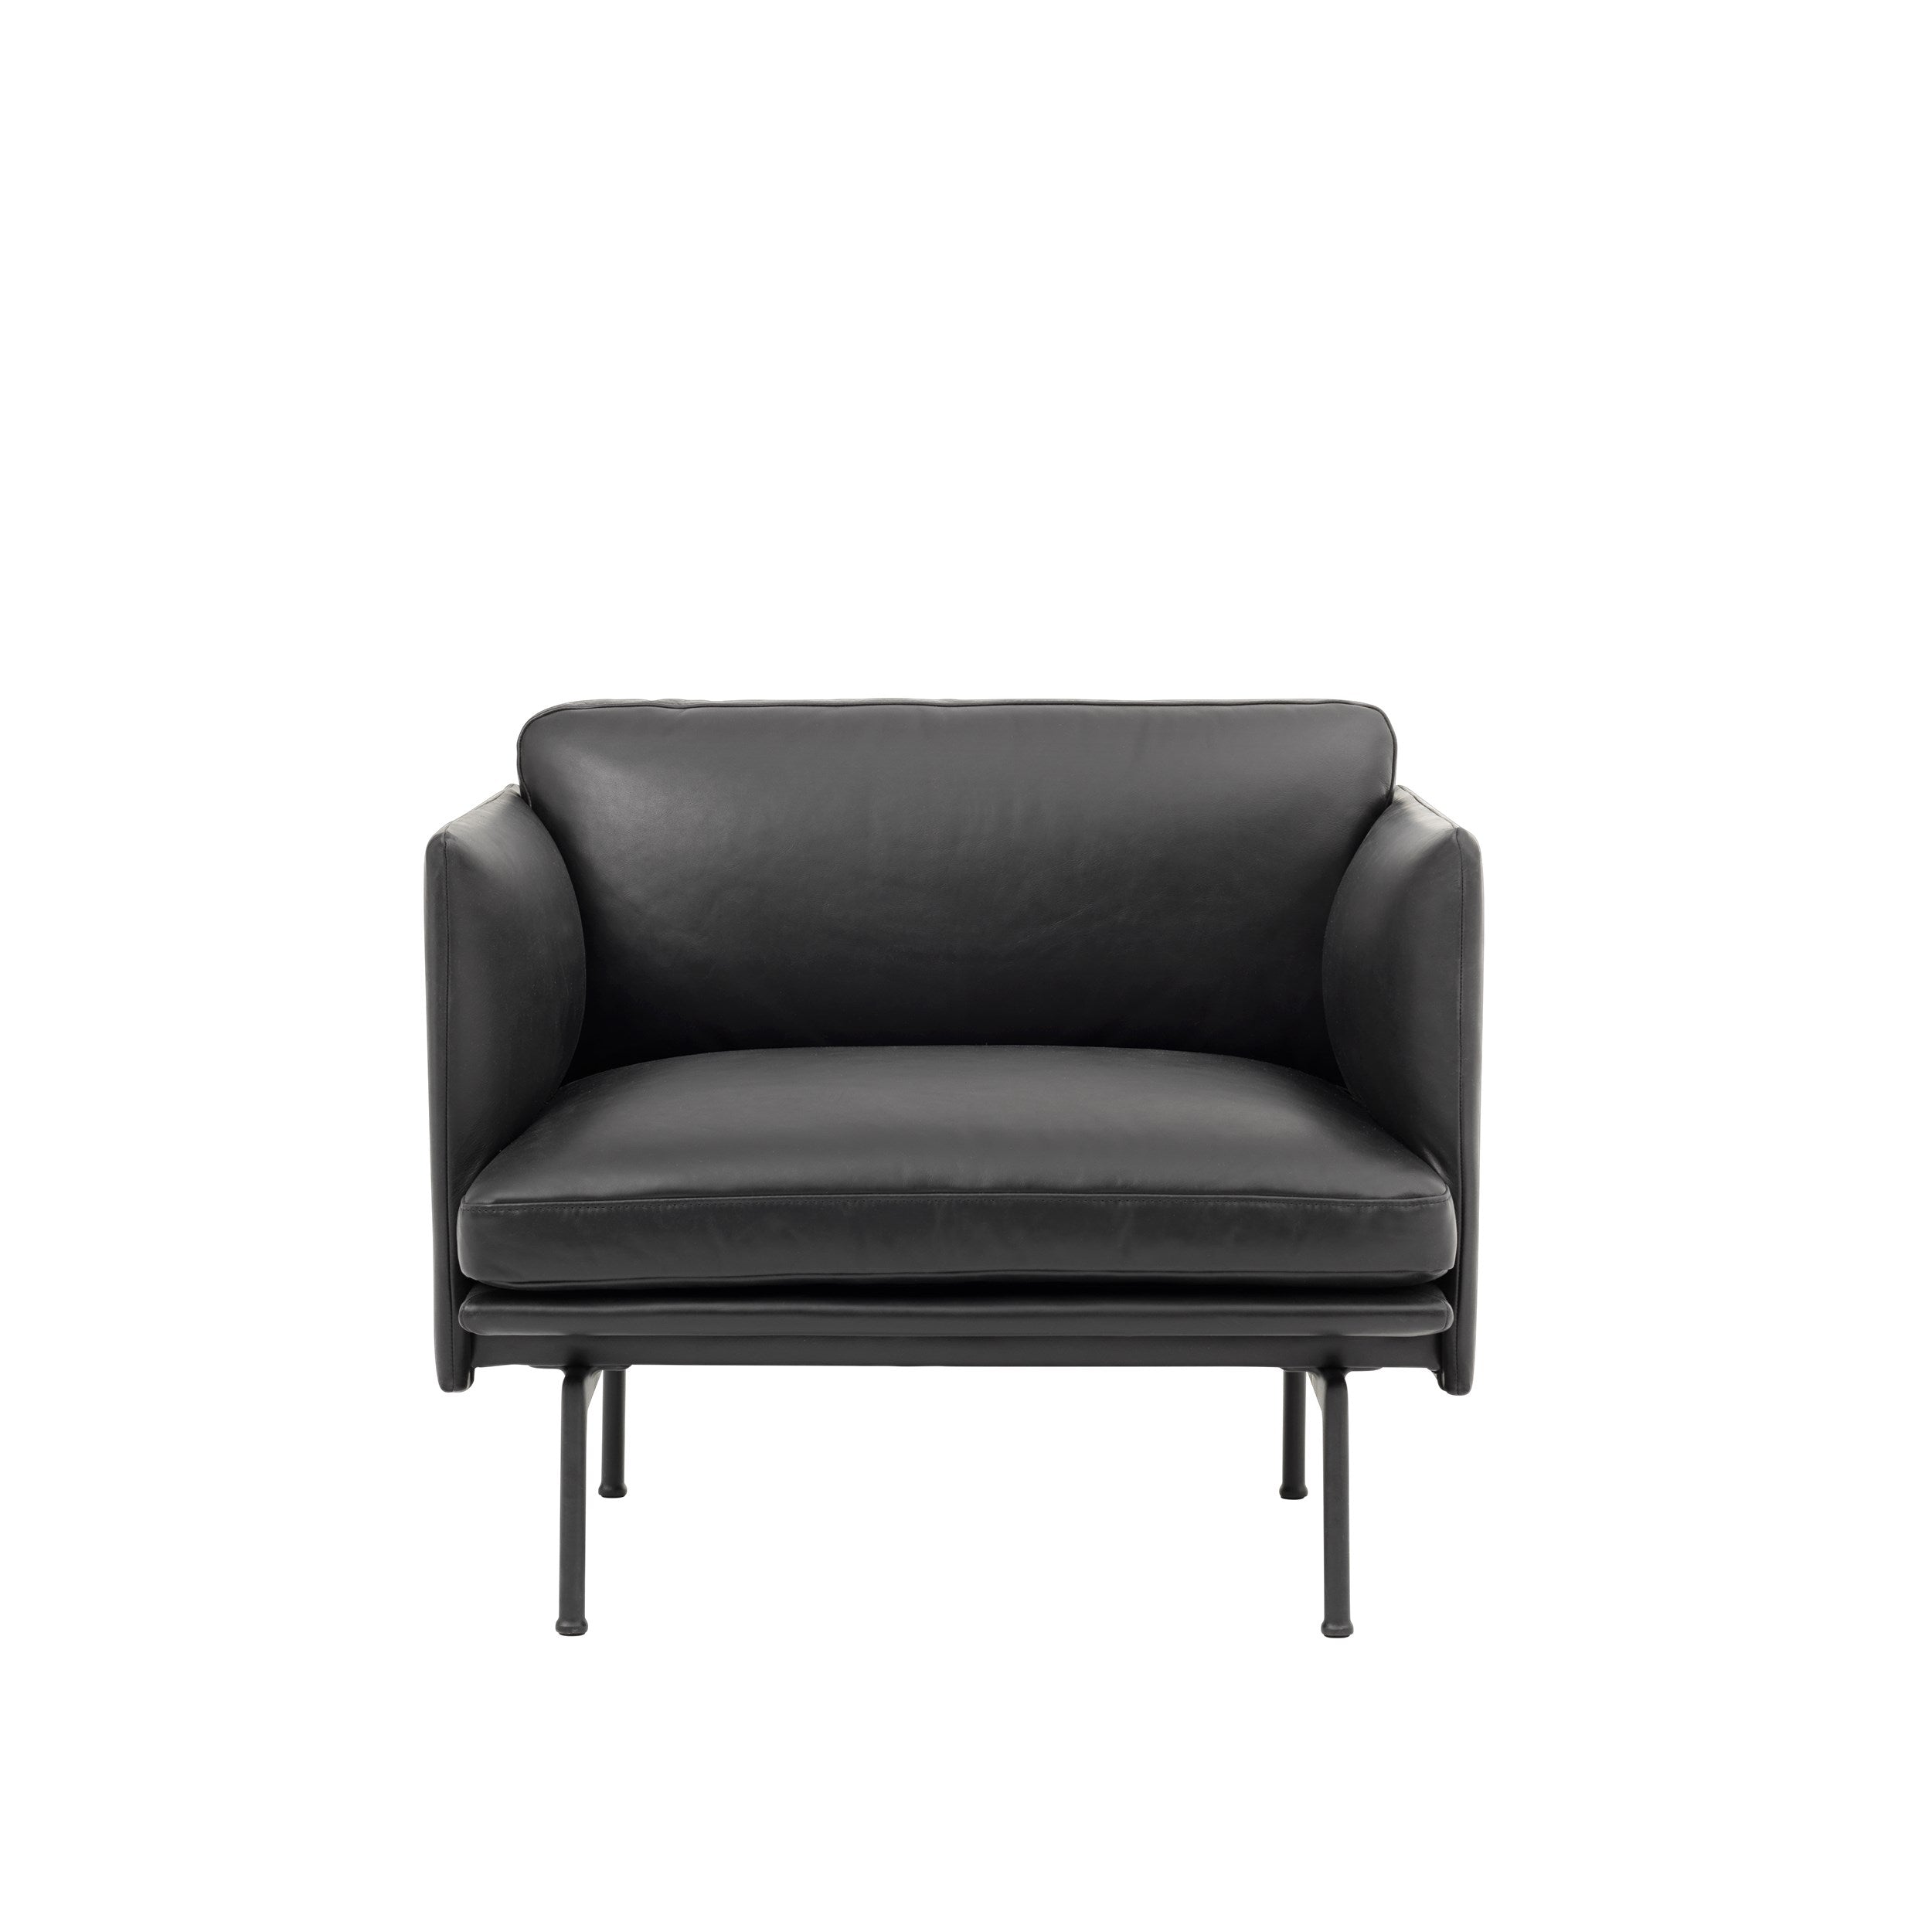 Muuto Outline Chair - Leather